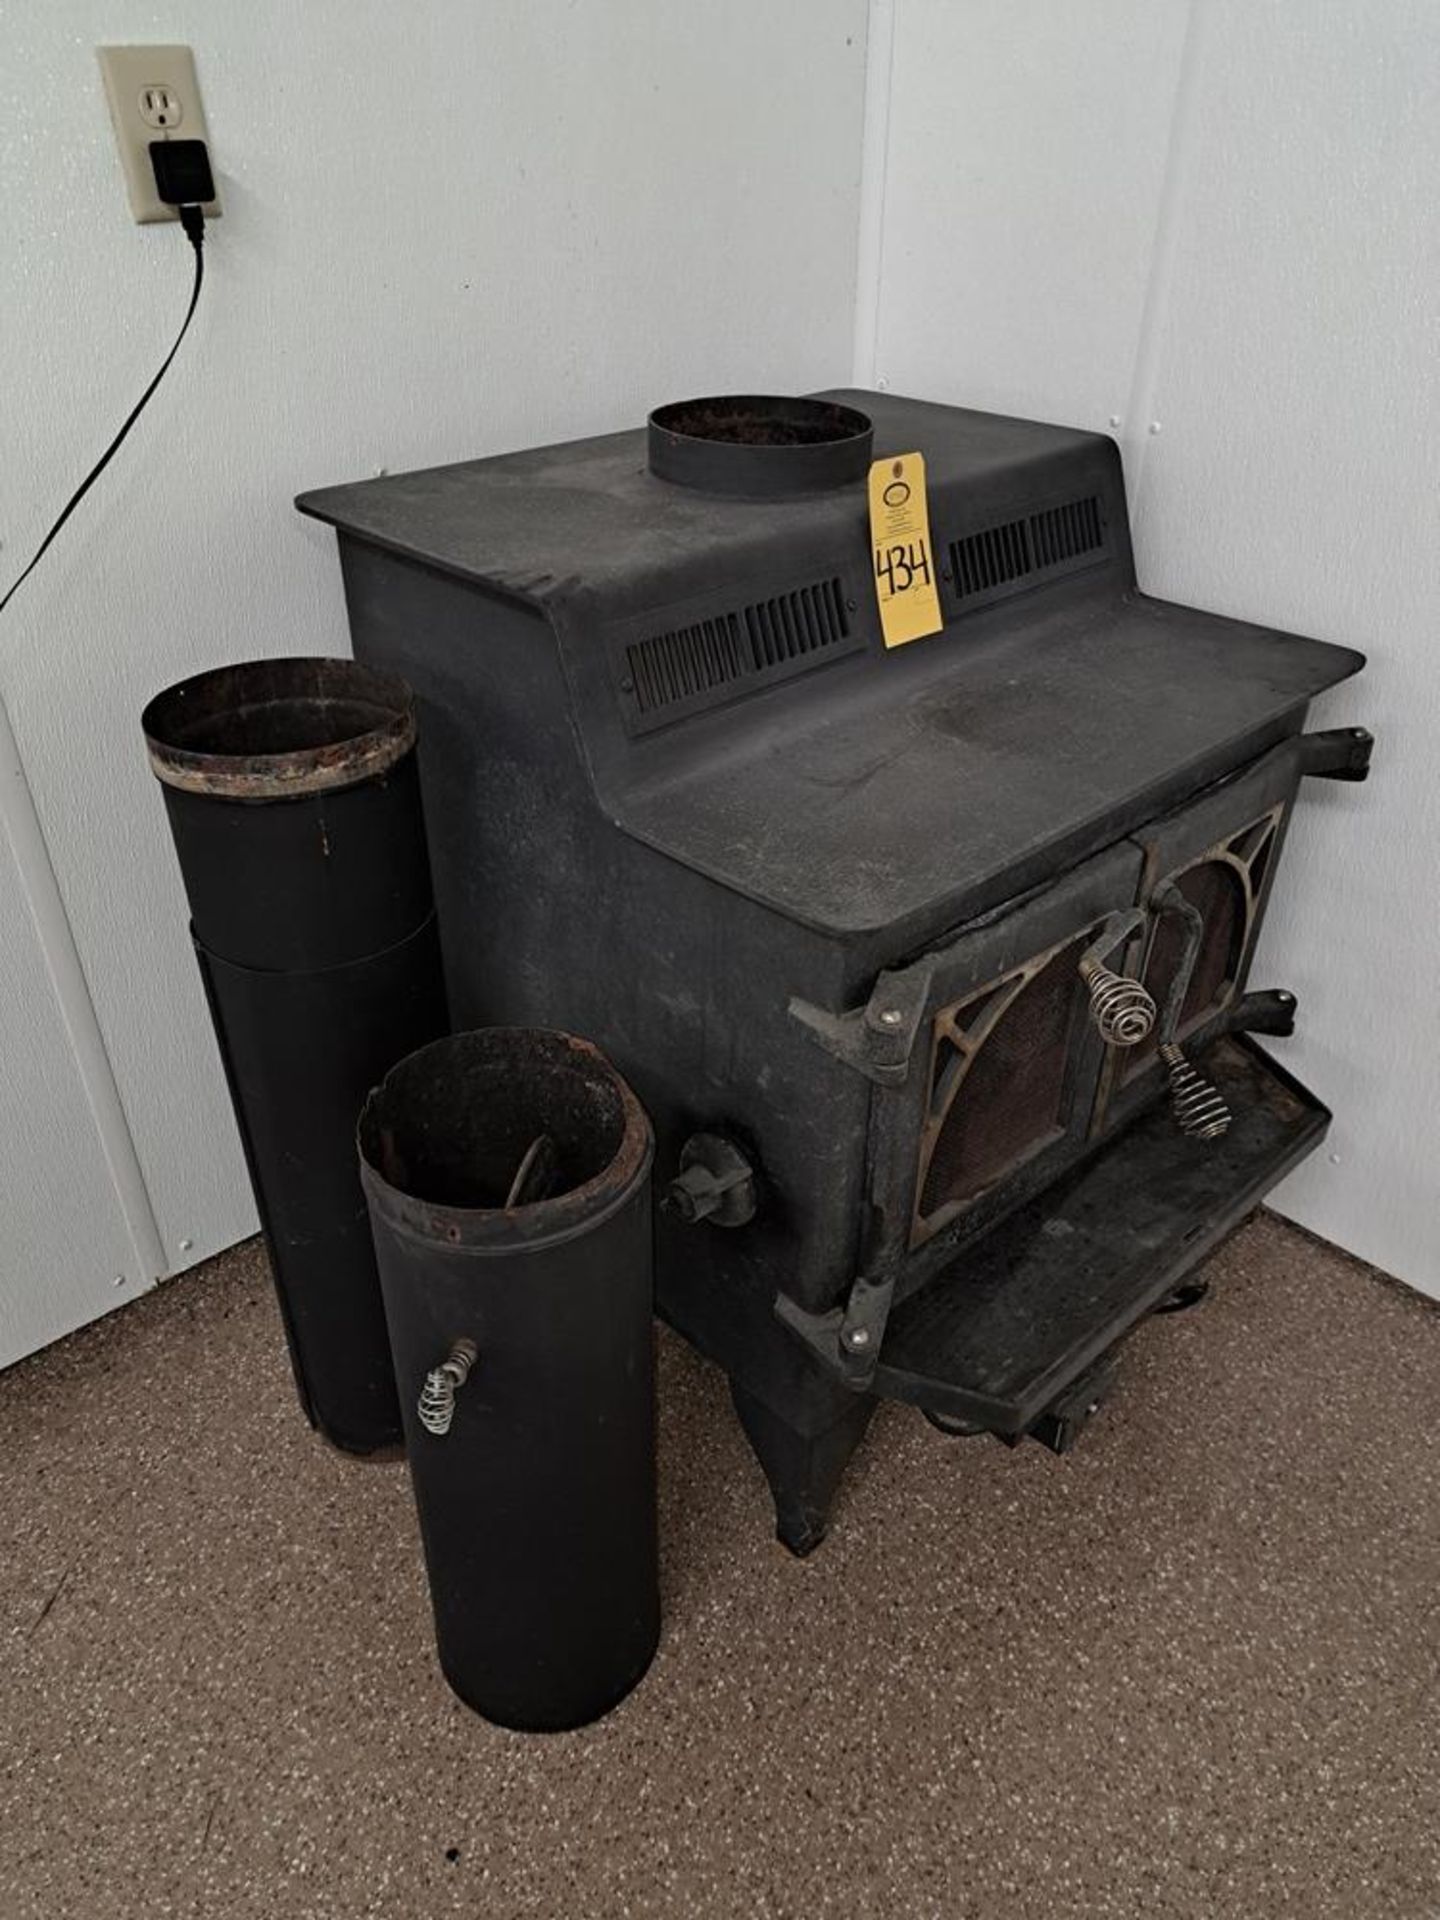 Wood Burning Stove, 30" wide X 32" deep X 36" tall (Required Loading Fee: $50.00) NO HAND CARRY ( - Bild 4 aus 4